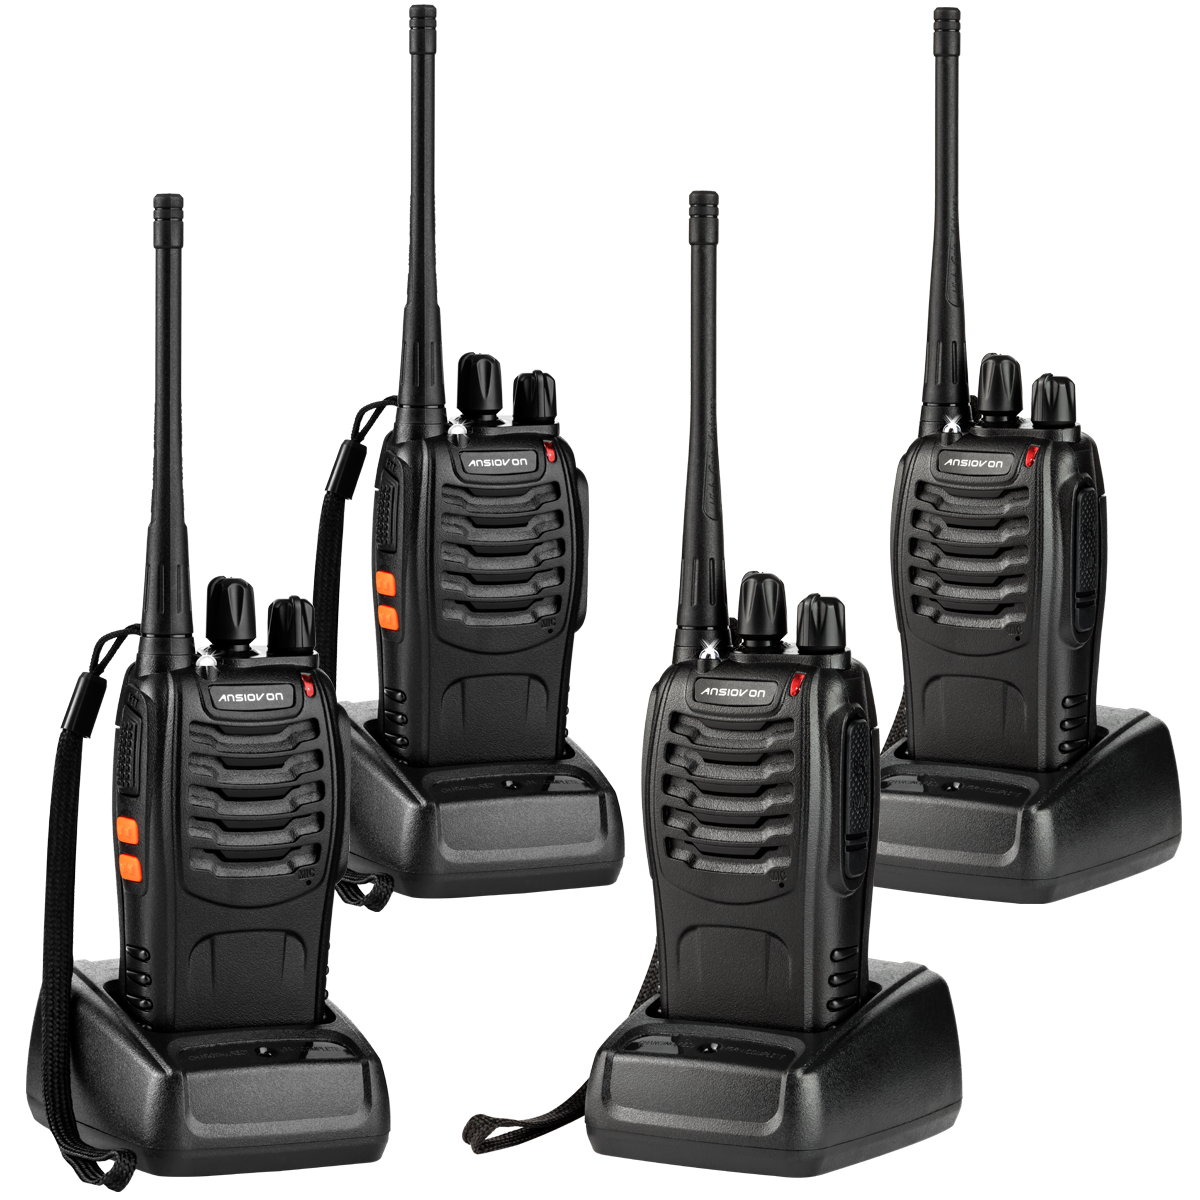 ANSIOVON Walkie Talkies for Adults, Long Range Rechargeable Walky Talk